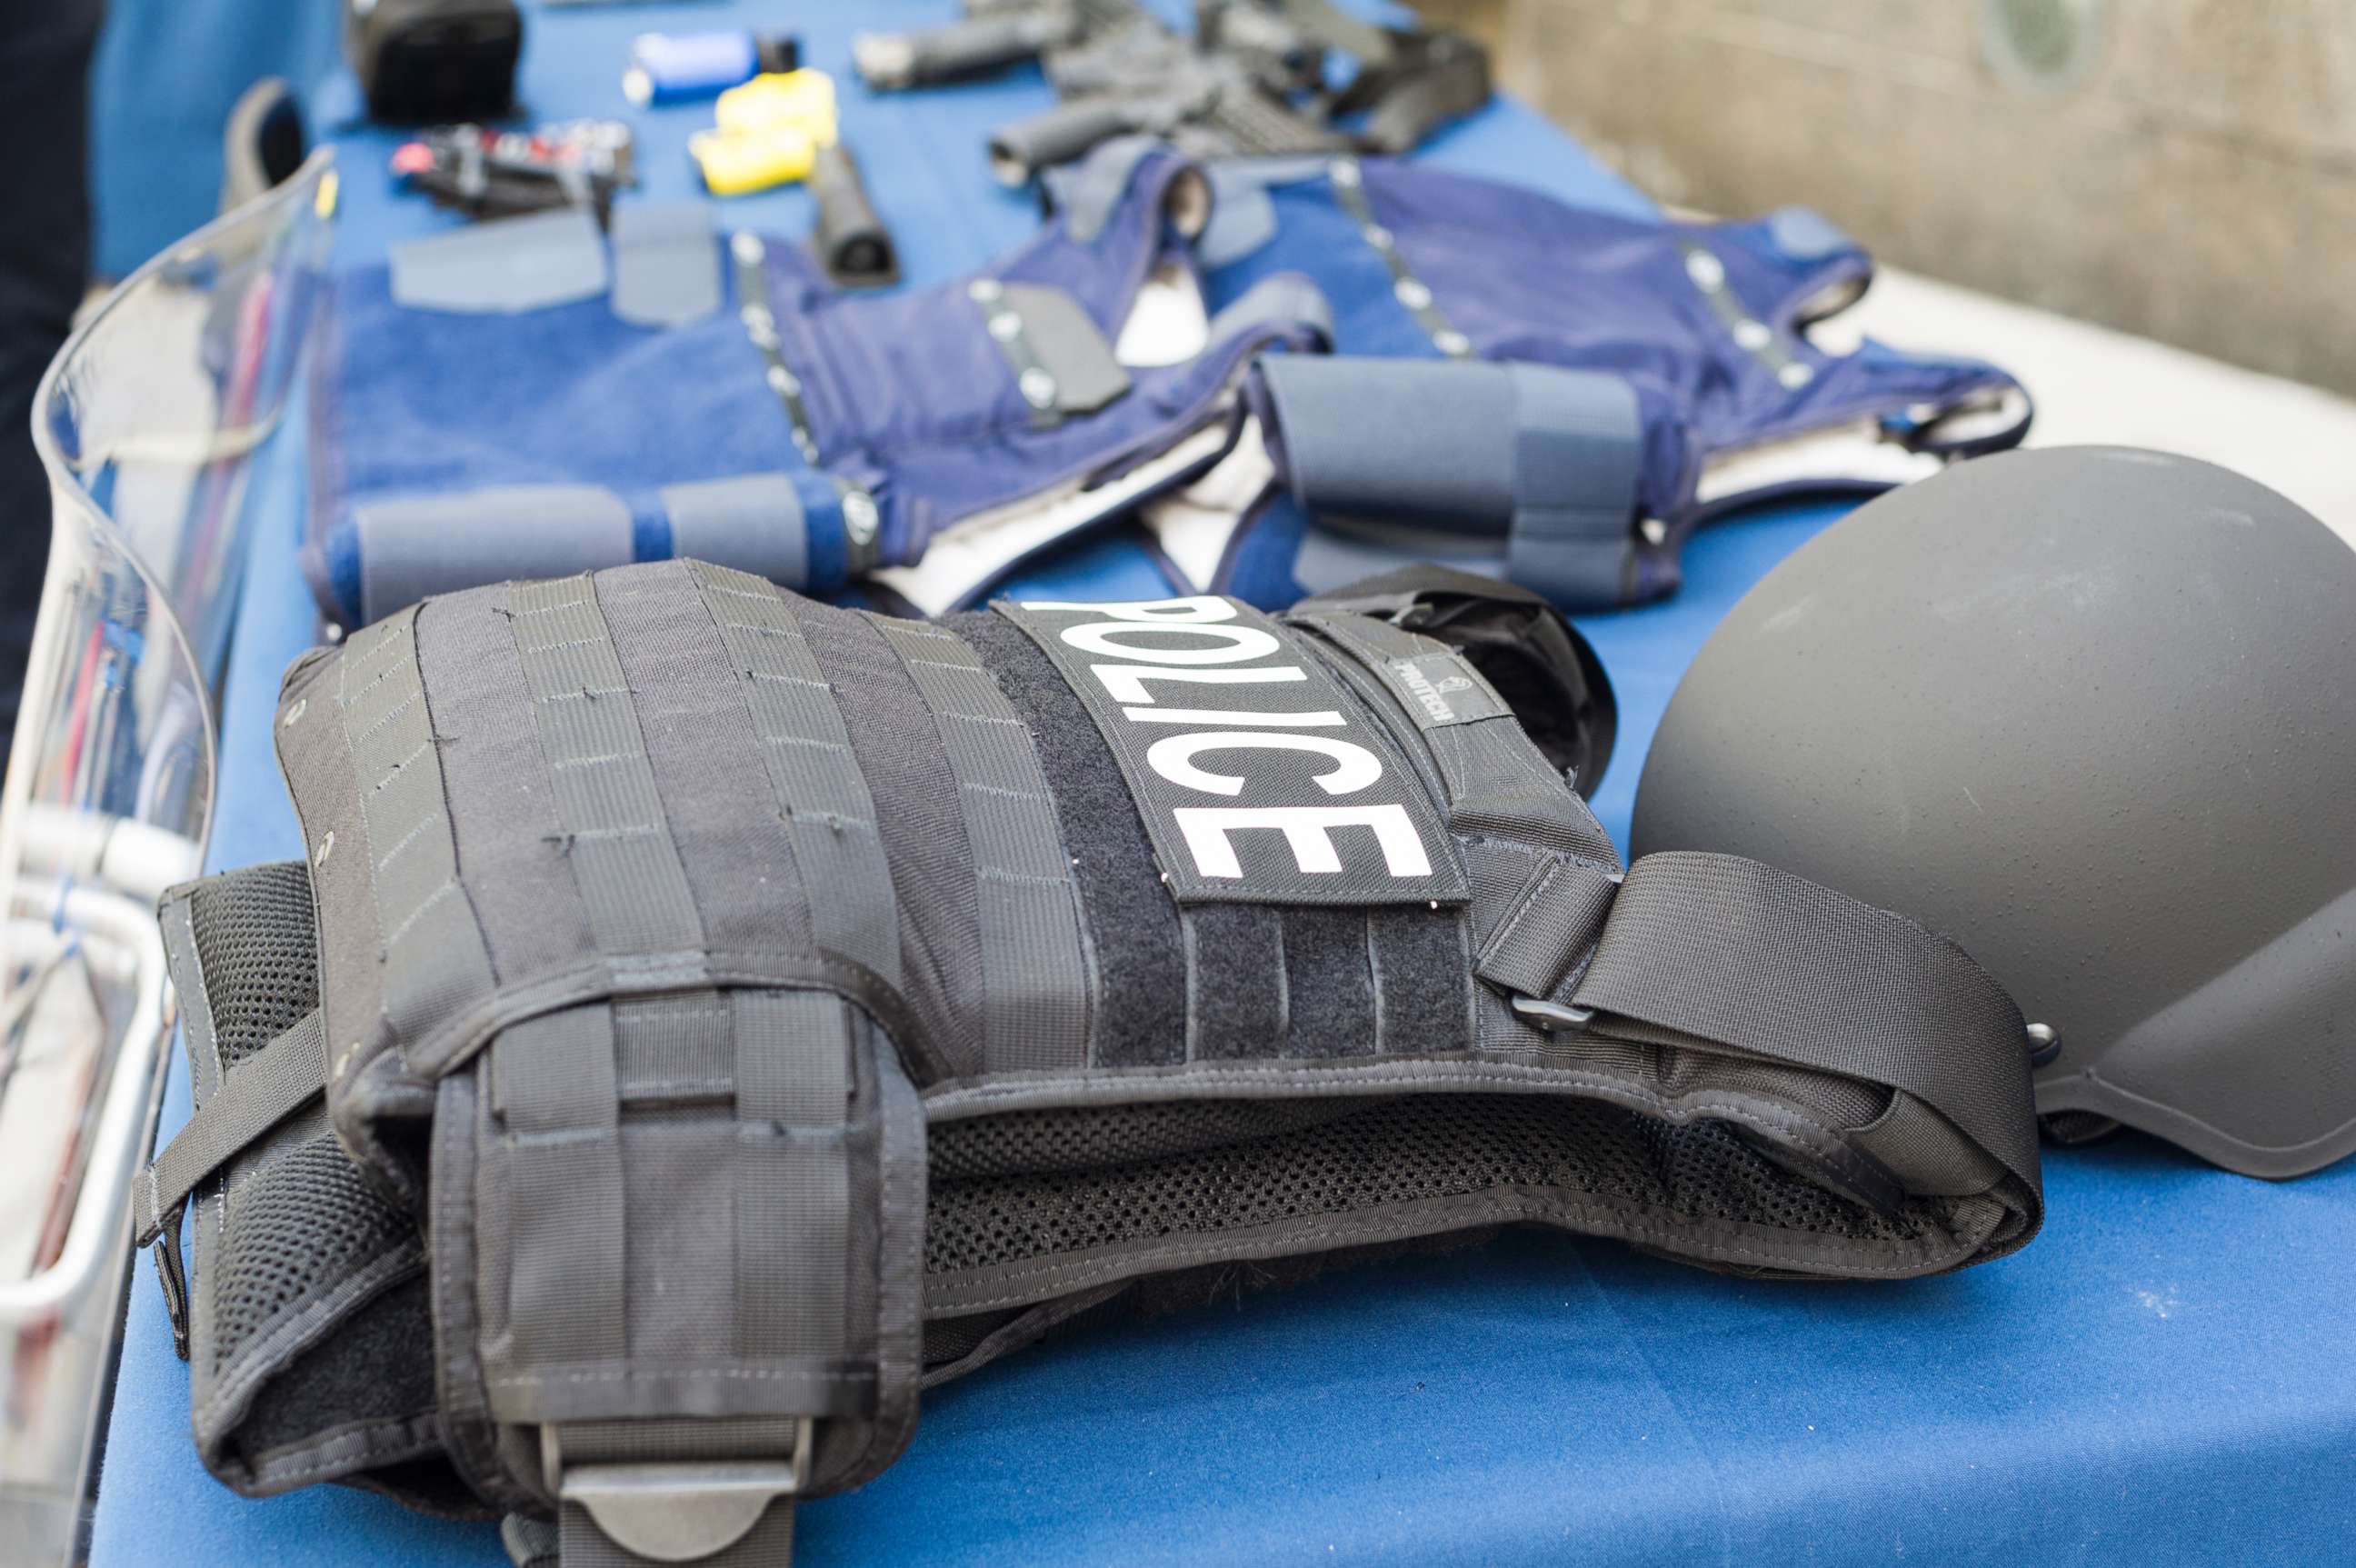 PHOTO: Police body armor is on display.